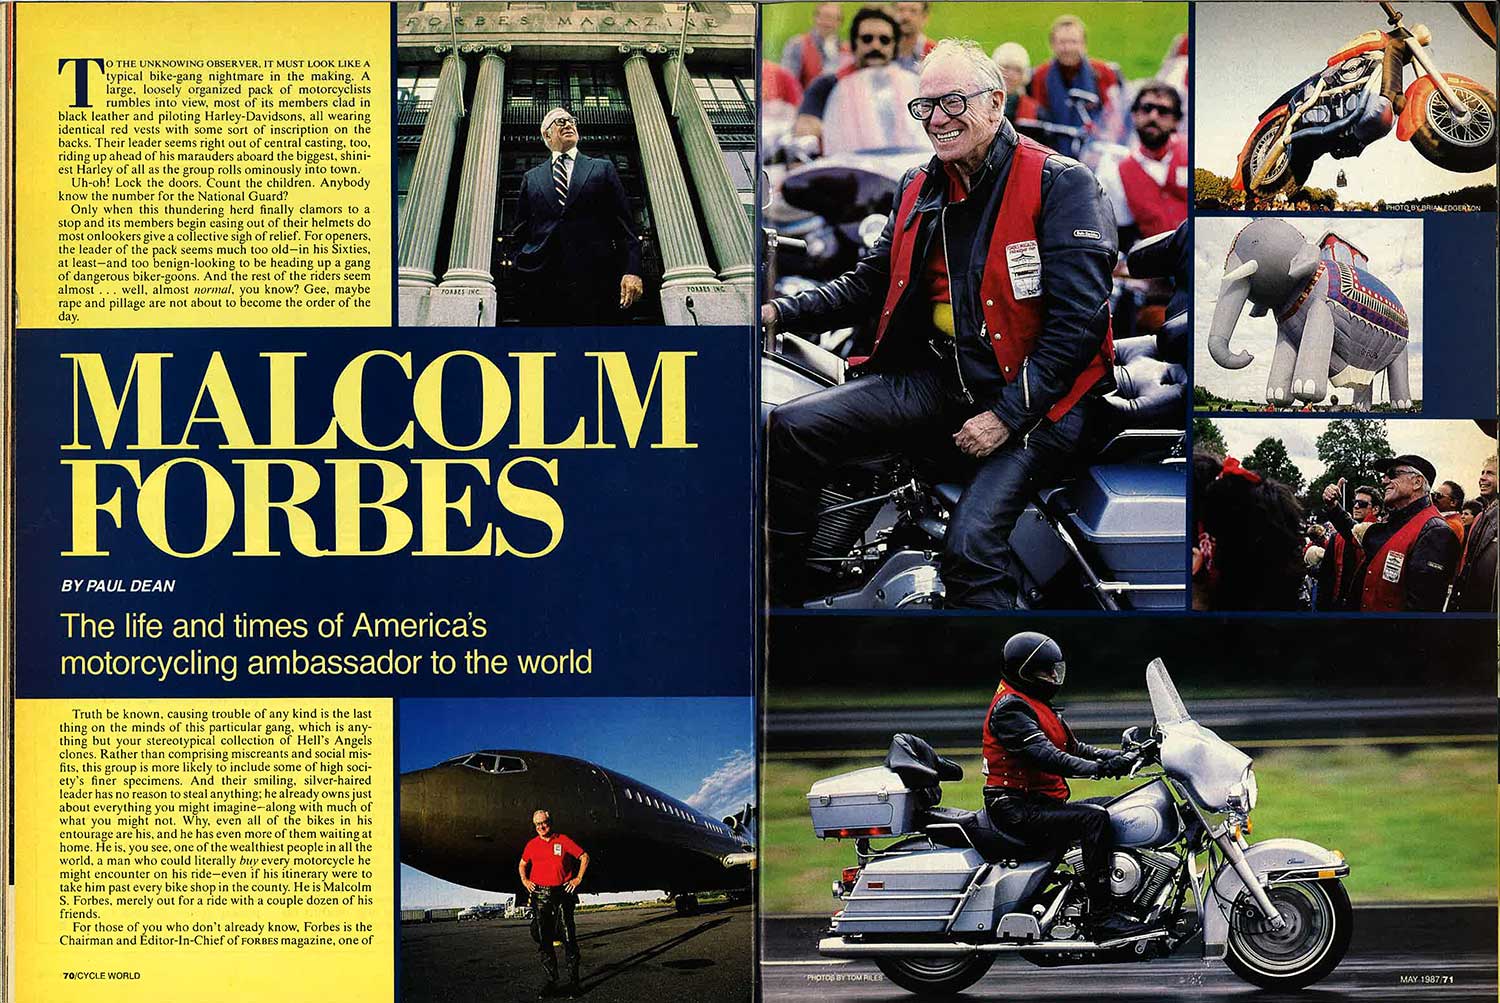 About half of Malcolm Forbes’ personal fleet were Harleys, according to 1987 Cycle World coverage.